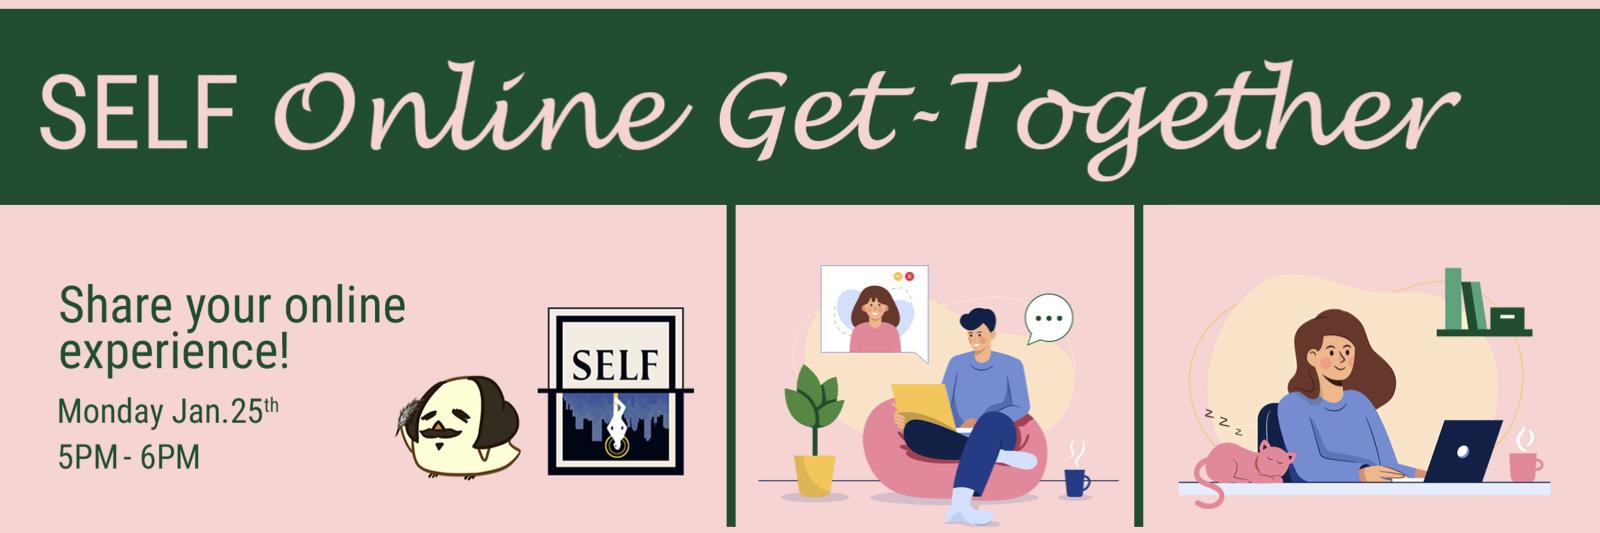 SELF Online Get Together: Cartoon characters & SELF logos invite you to join